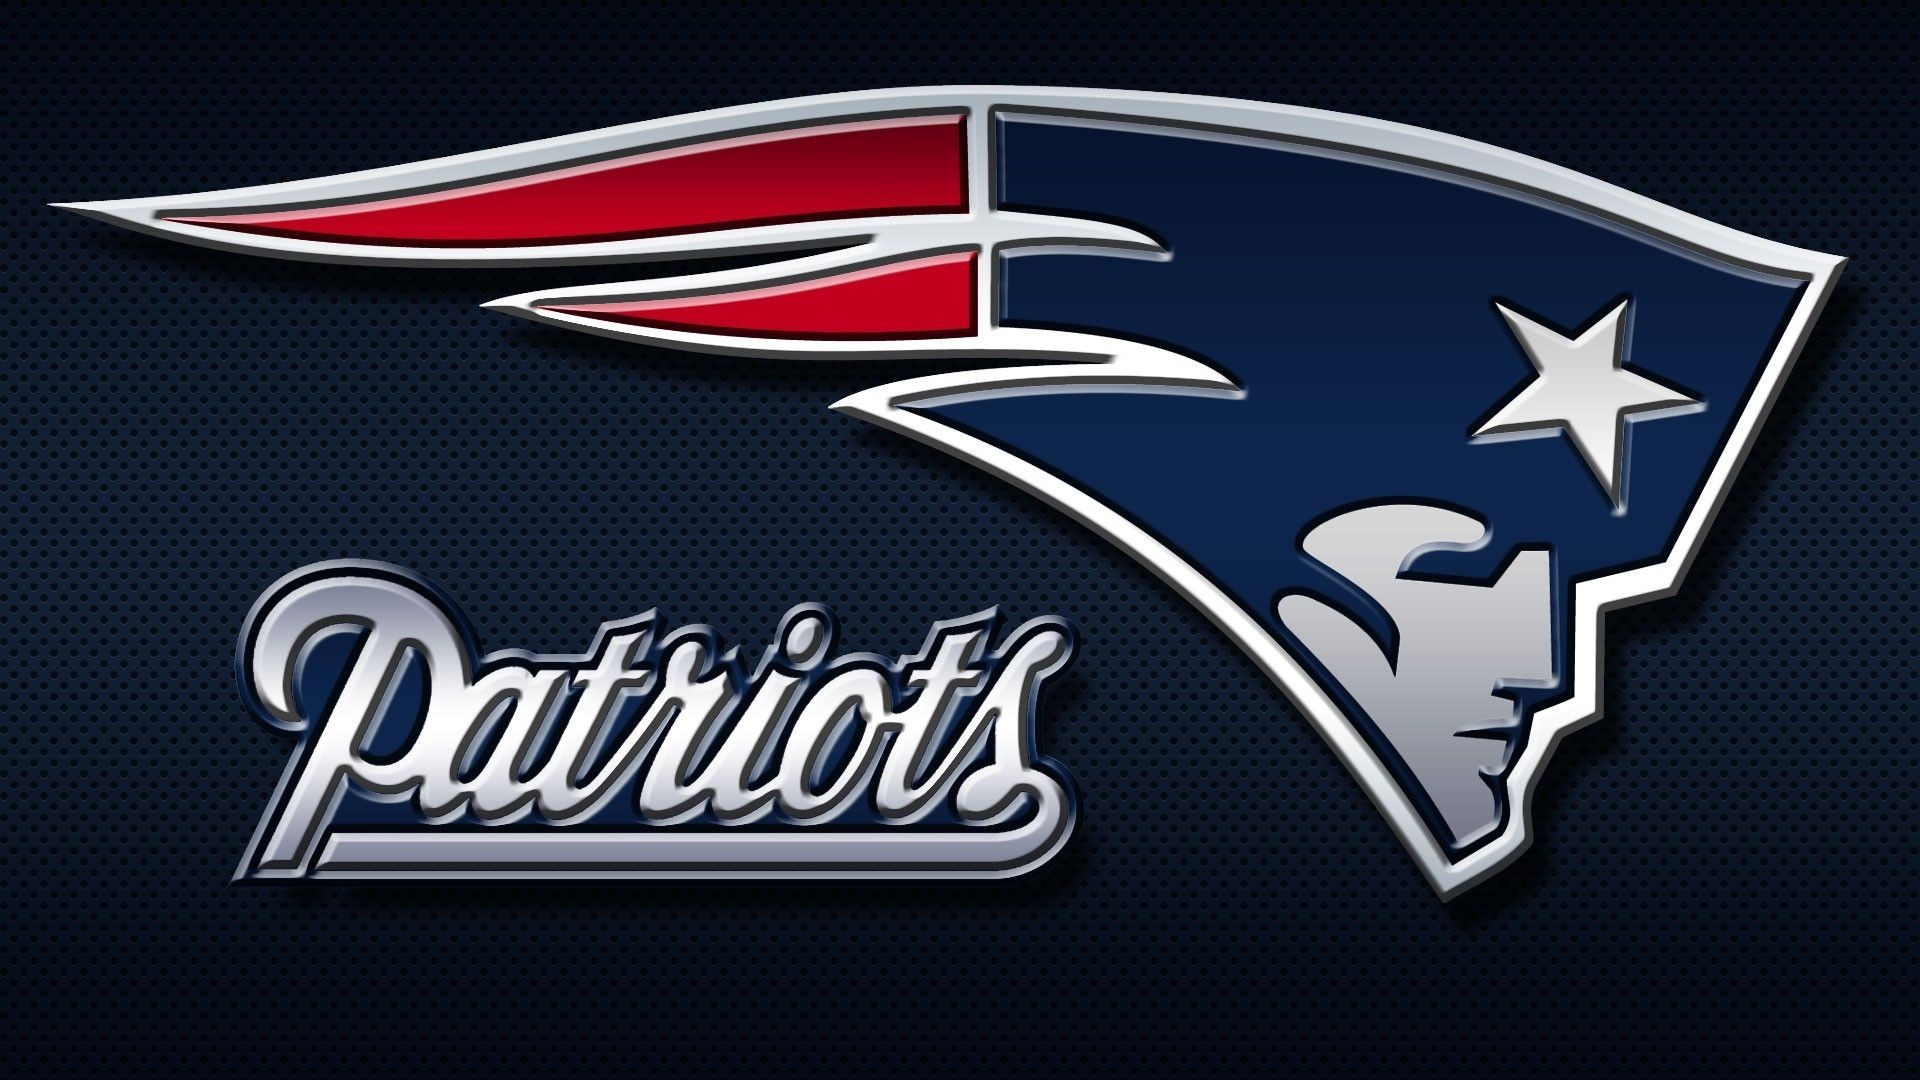 Wallpapers HD New England Patriots NFL with high-resolution 1920x1080 pixel. You can use this wallpaper for your Mac or Windows Desktop Background, iPhone, Android or Tablet and another Smartphone device